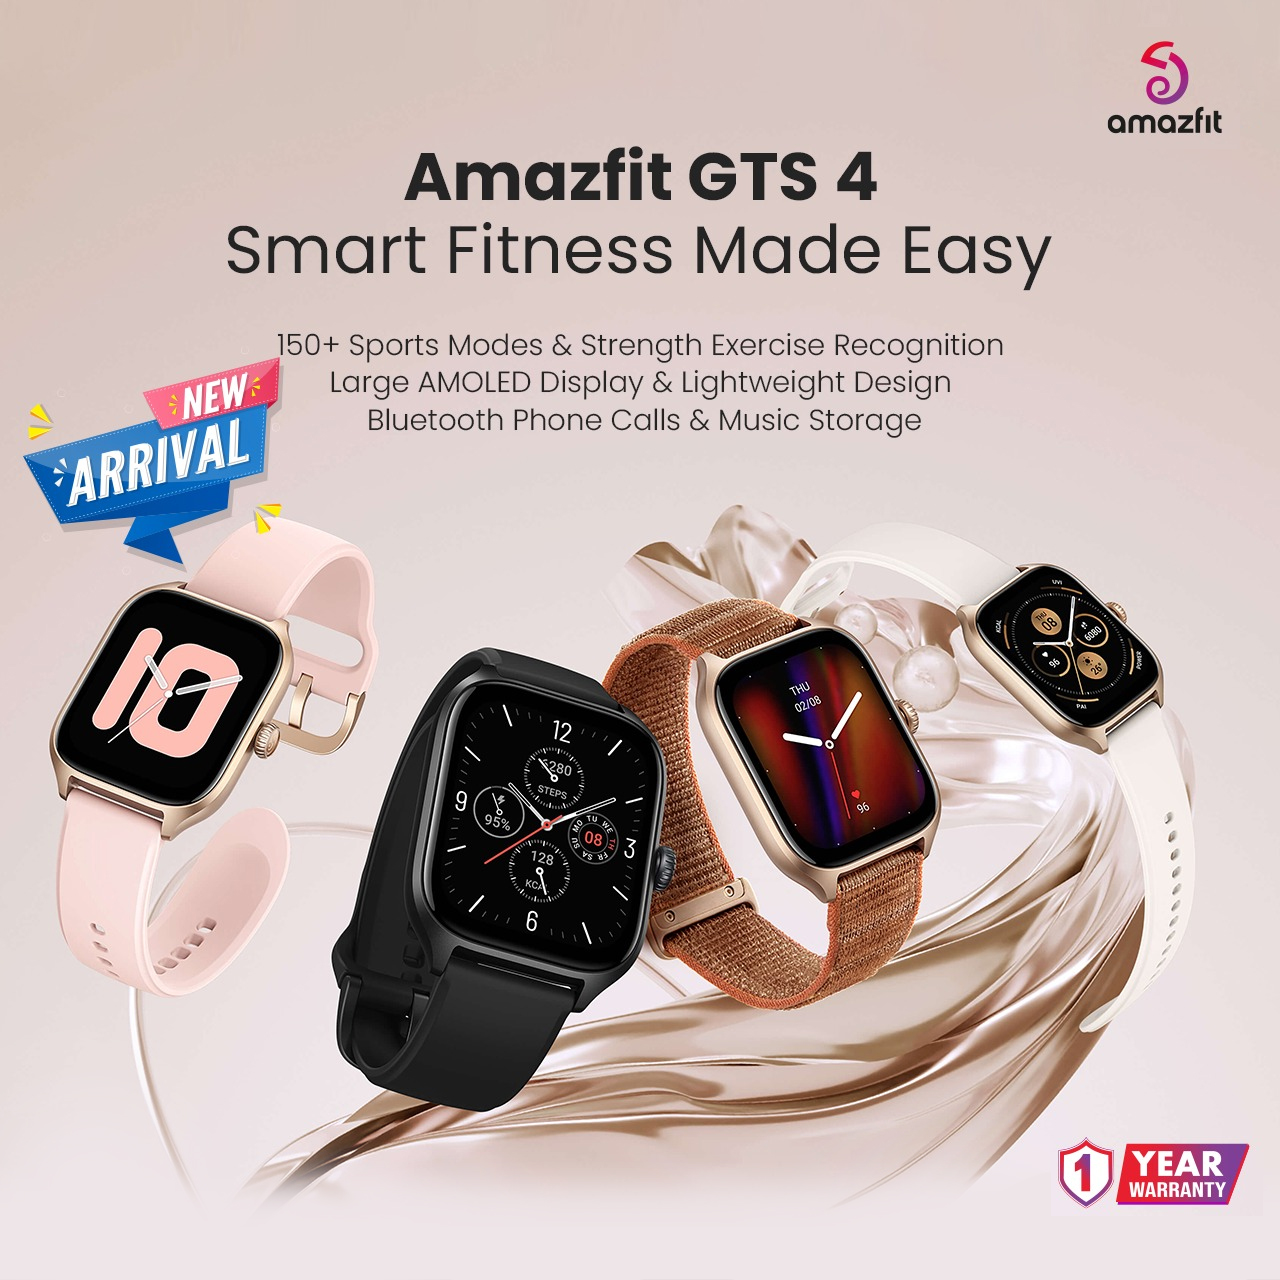 Amazfit GTS 4 review: Fitness smartwatch with big display